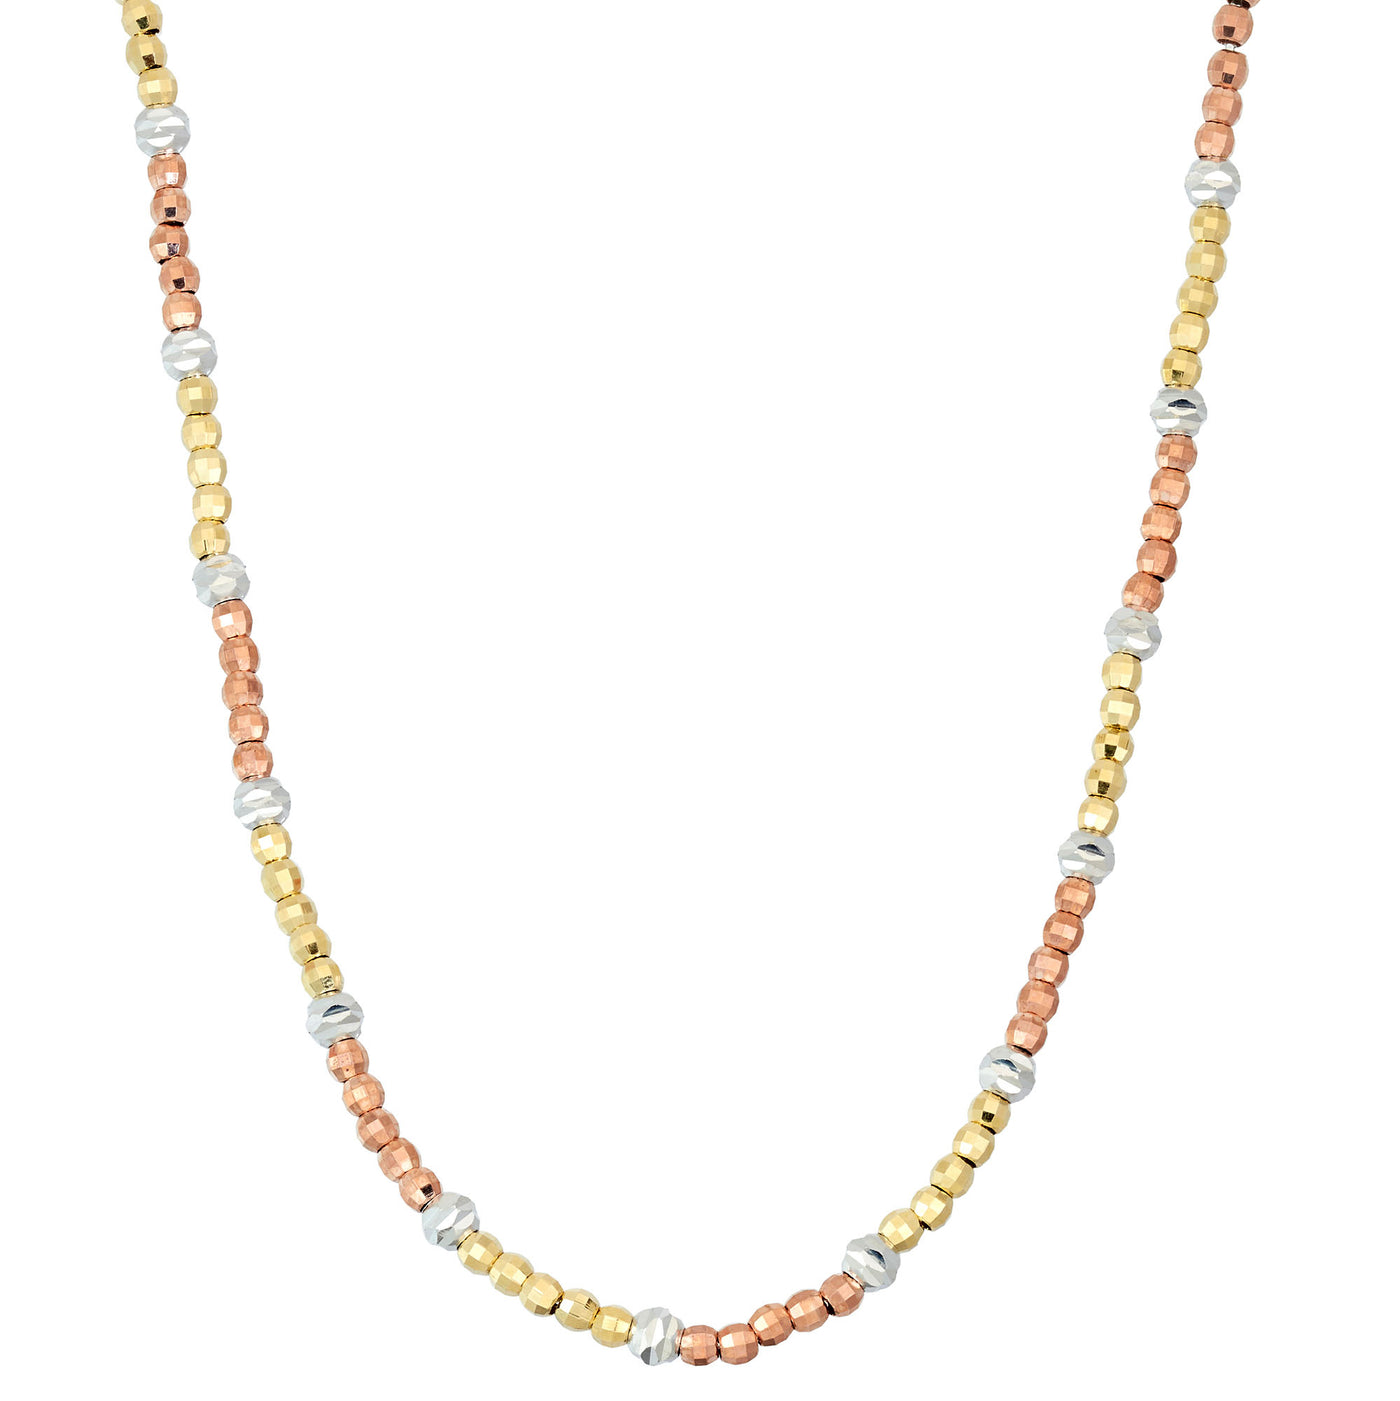 Rebecca Sloane Tri-Color Necklace with Round Faceted Beads